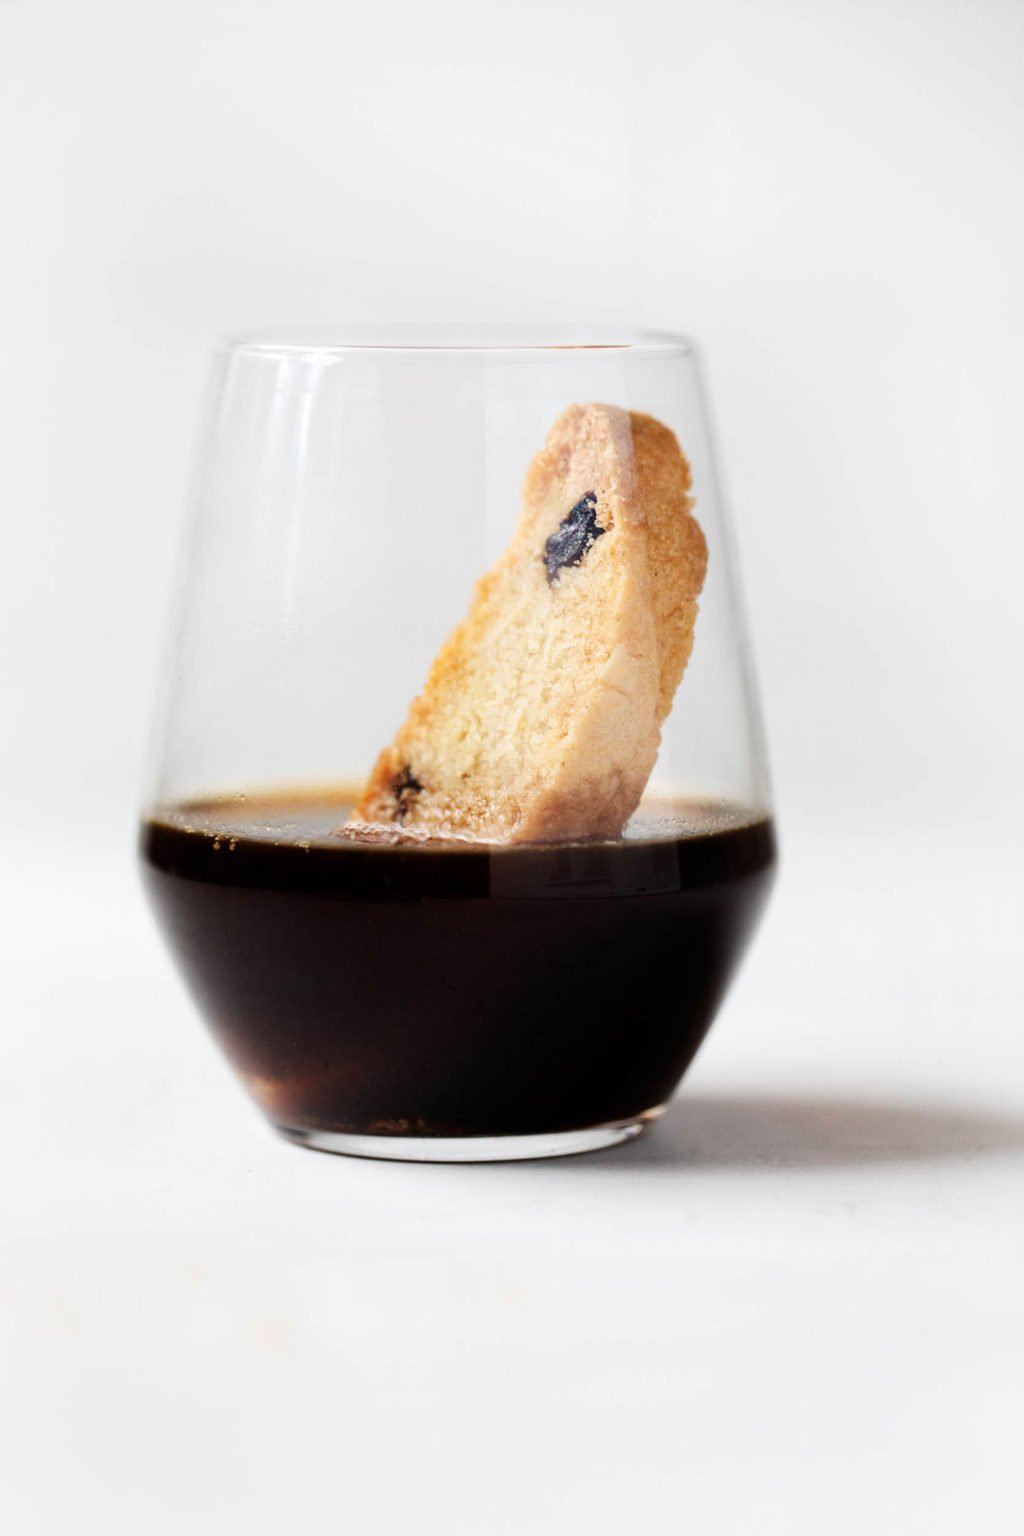 A clear glass of black coffee, with a piece of biscotti dunked inside.